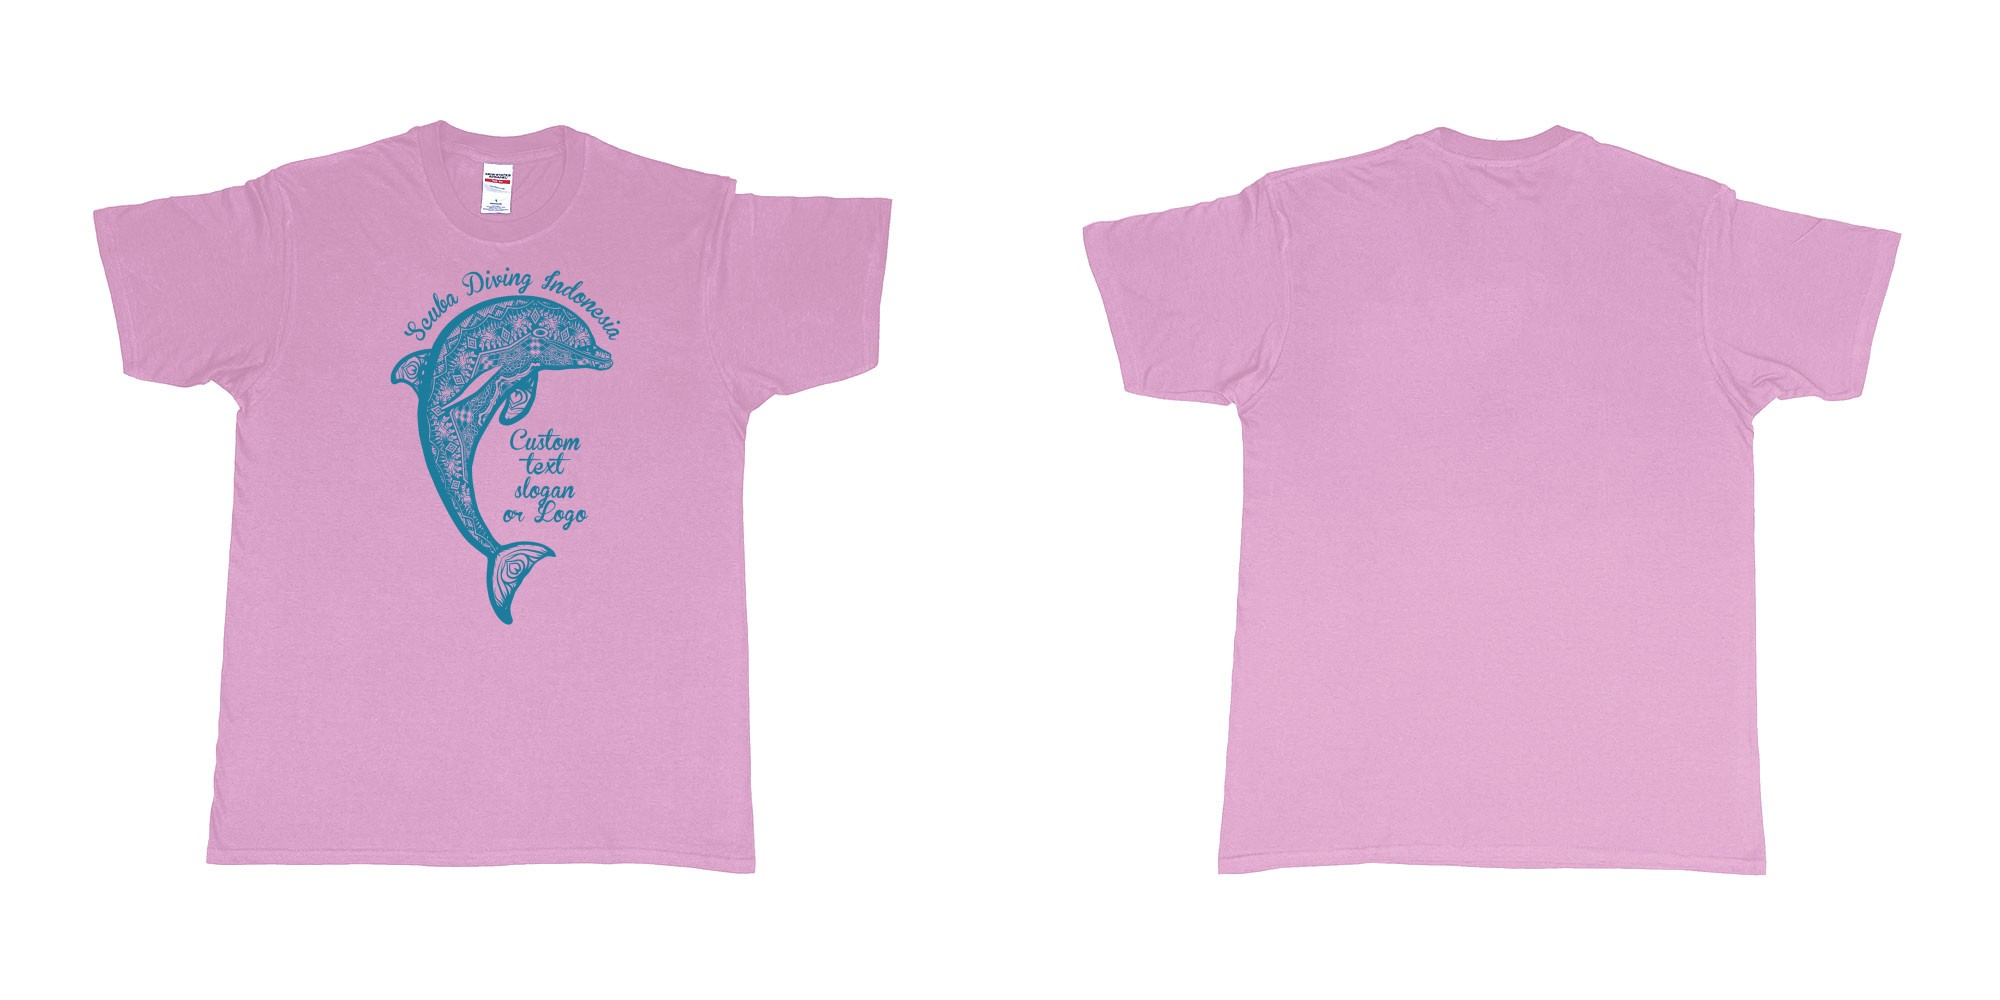 Custom tshirt design dolphin bali pattern scuba diving indonesia in fabric color light-pink choice your own text made in Bali by The Pirate Way